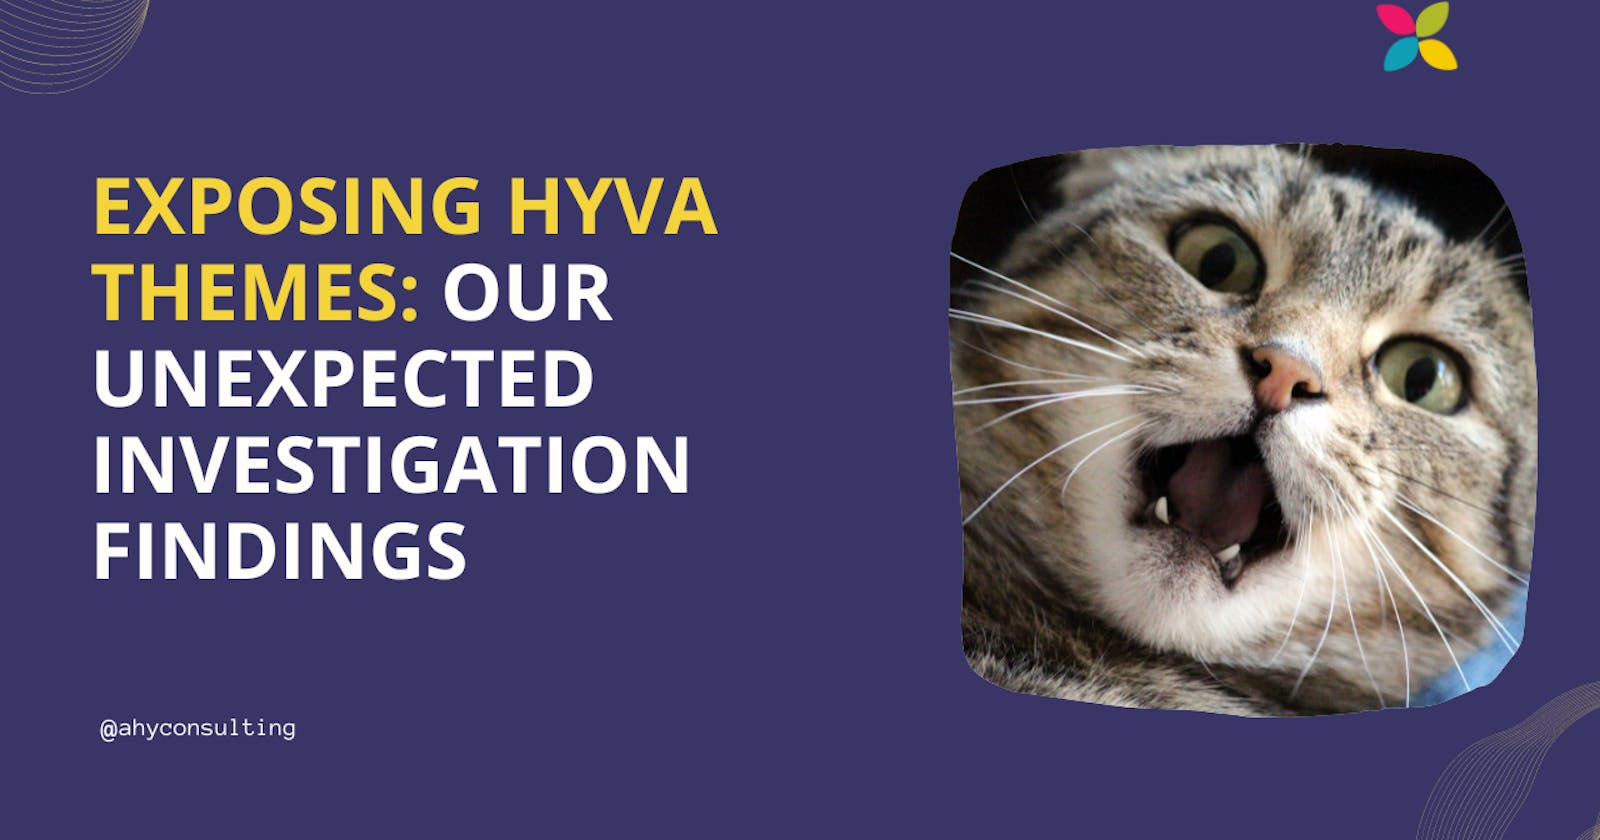 Exposing Hyvä Themes: Our Unexpected Investigation Findings